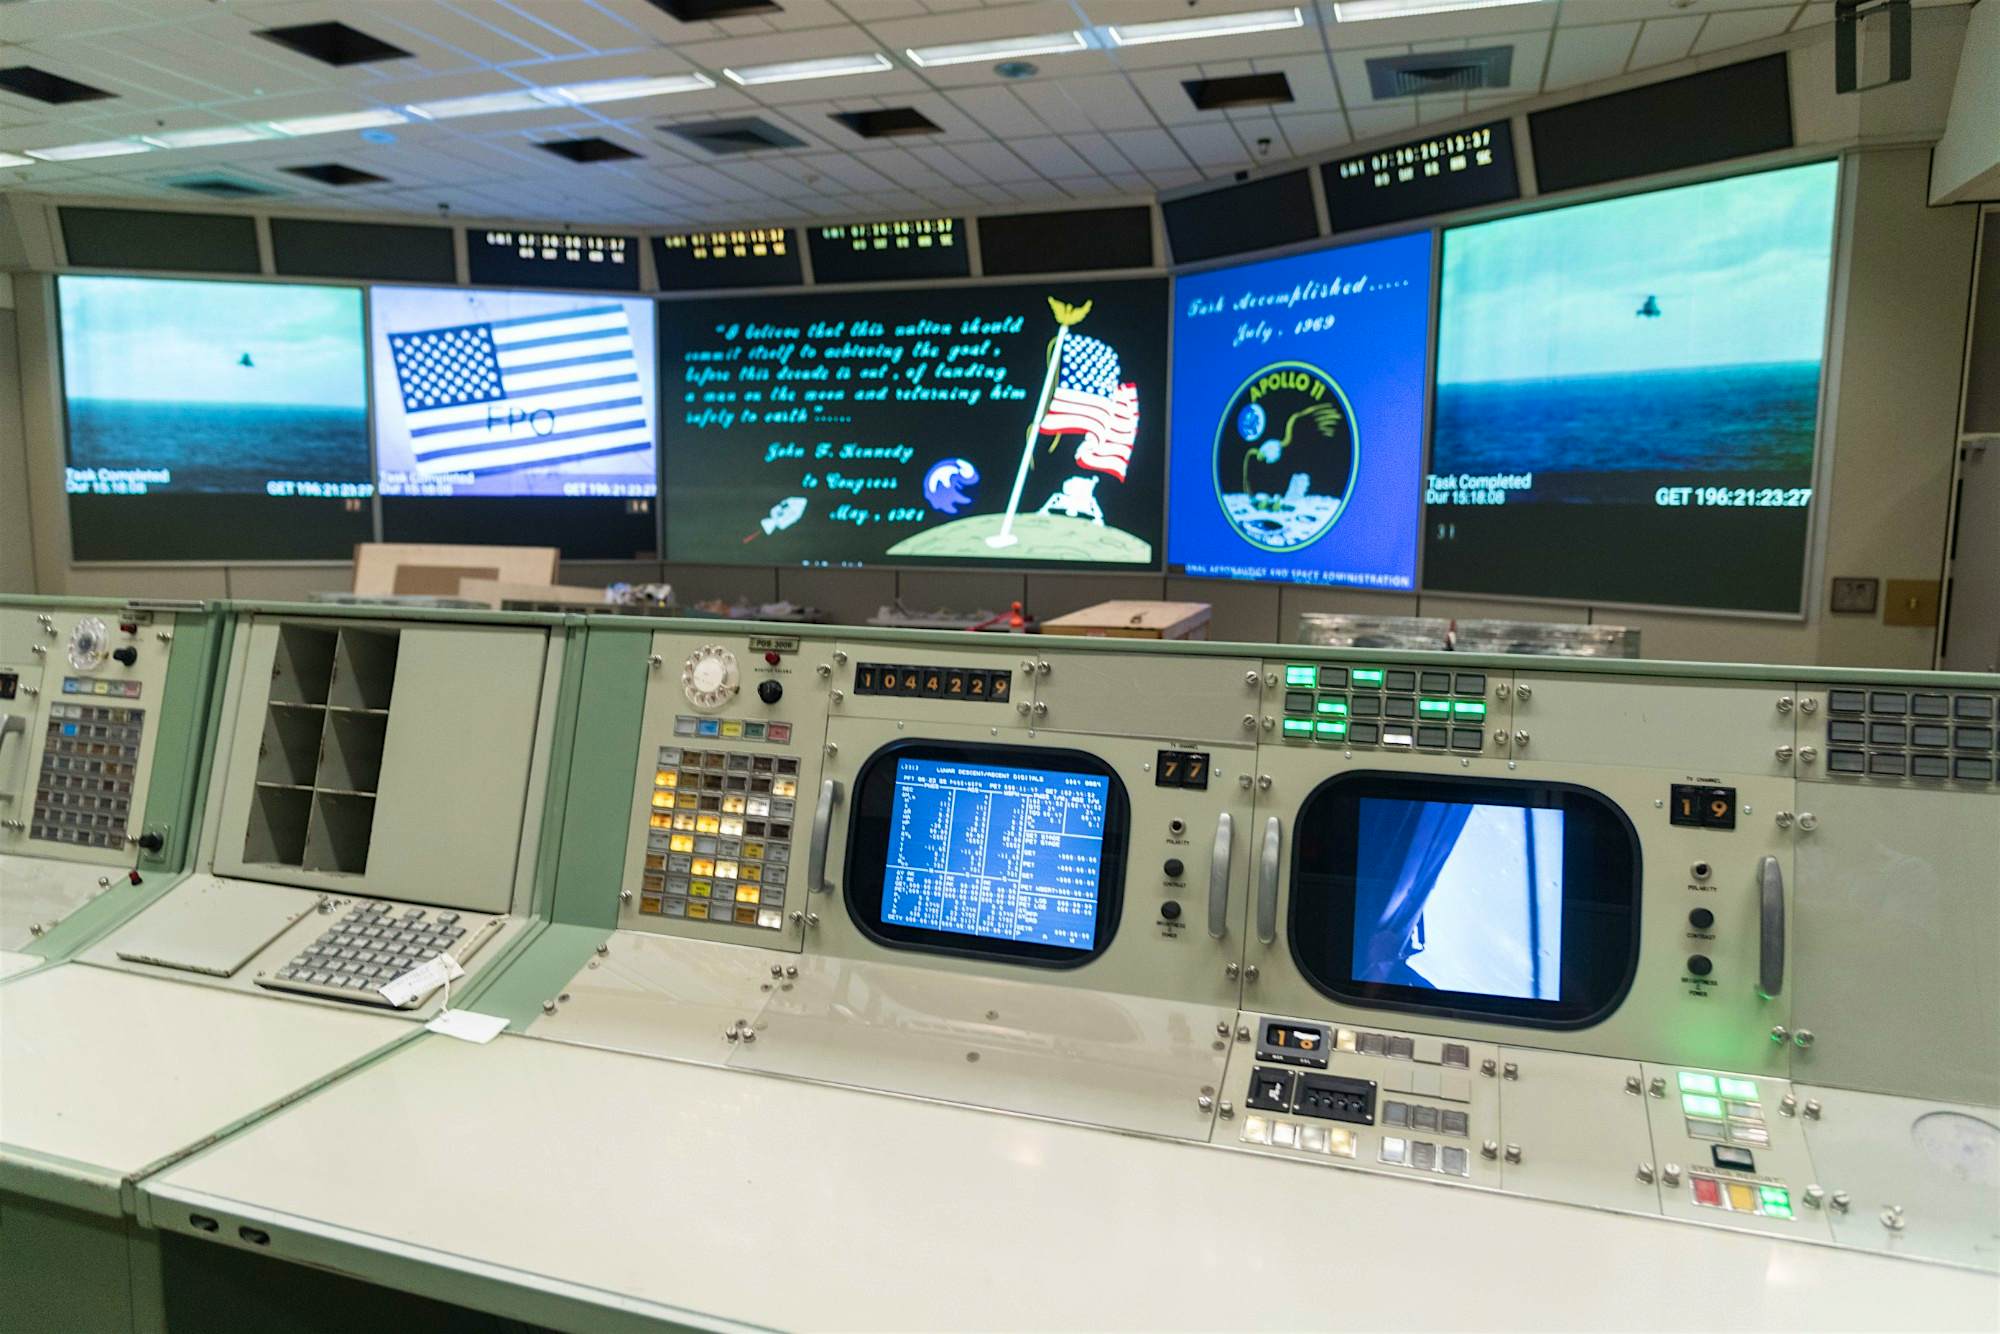 Houston S Mission Control Center Restored In Time For The Lunar